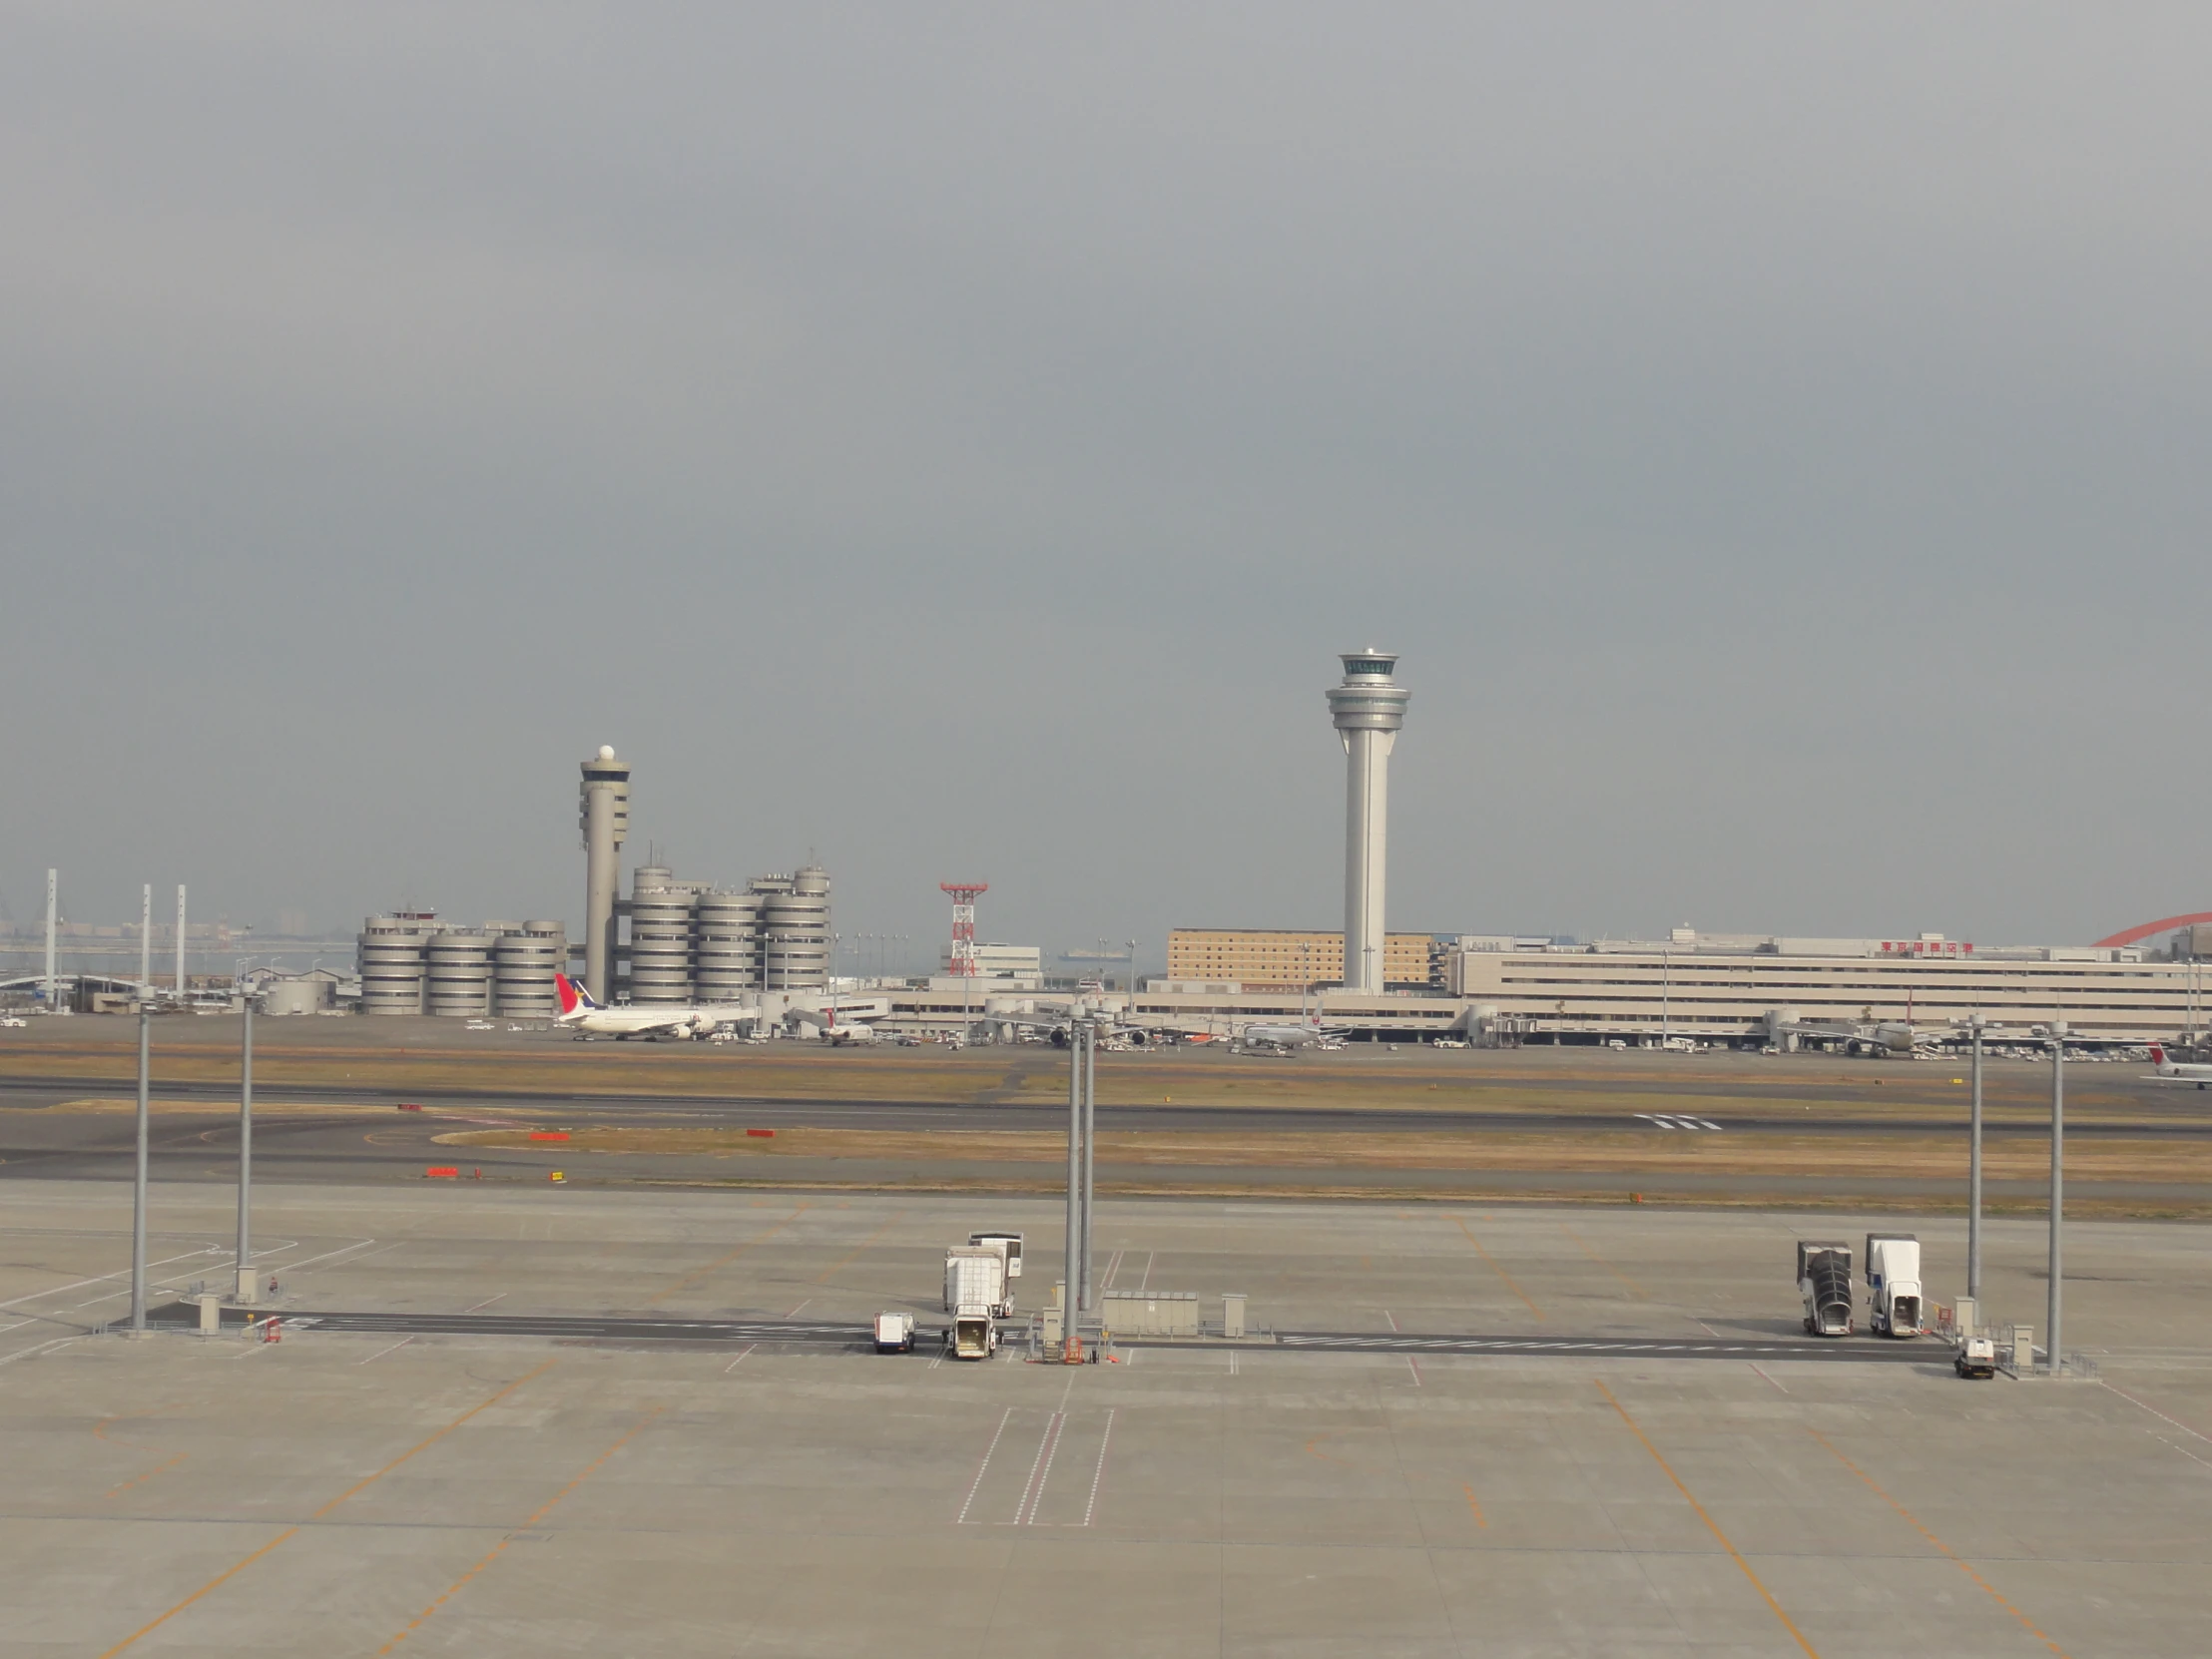 three trucks sit on the runway near the control towers